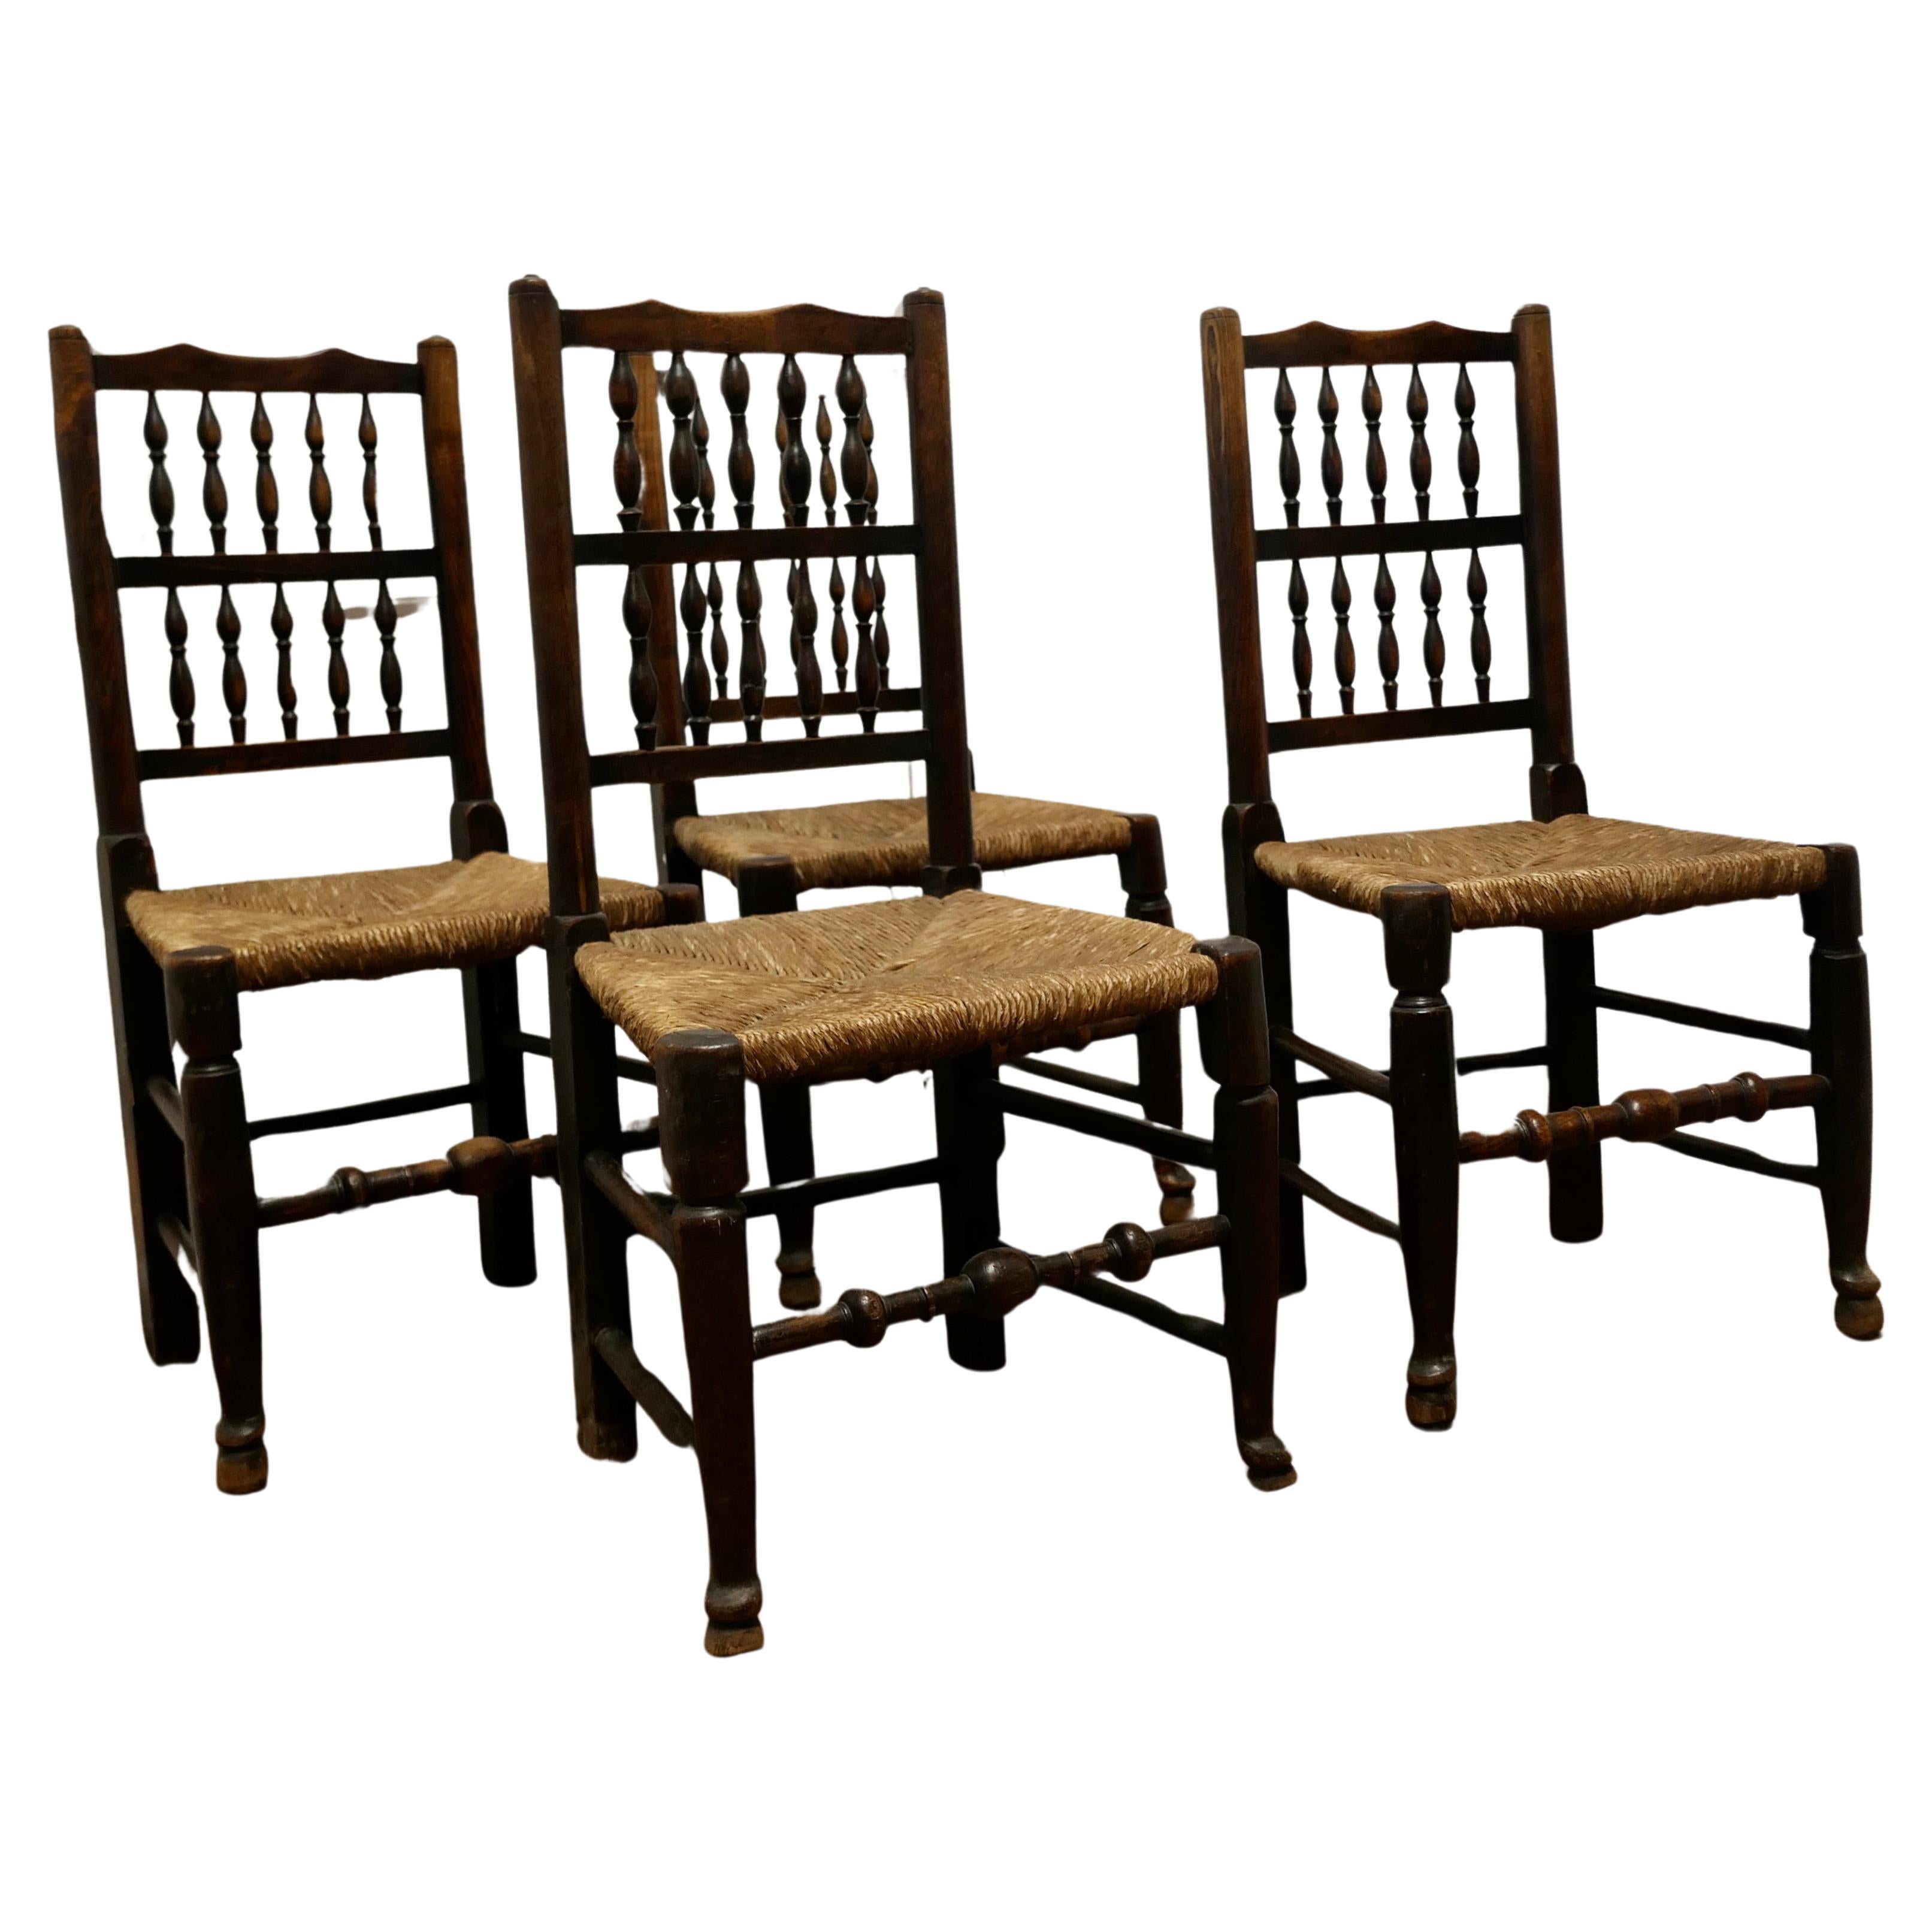 A Set of 4 Lancashire Spindle Back Farmhouse Kitchen Dining Chairs   For Sale